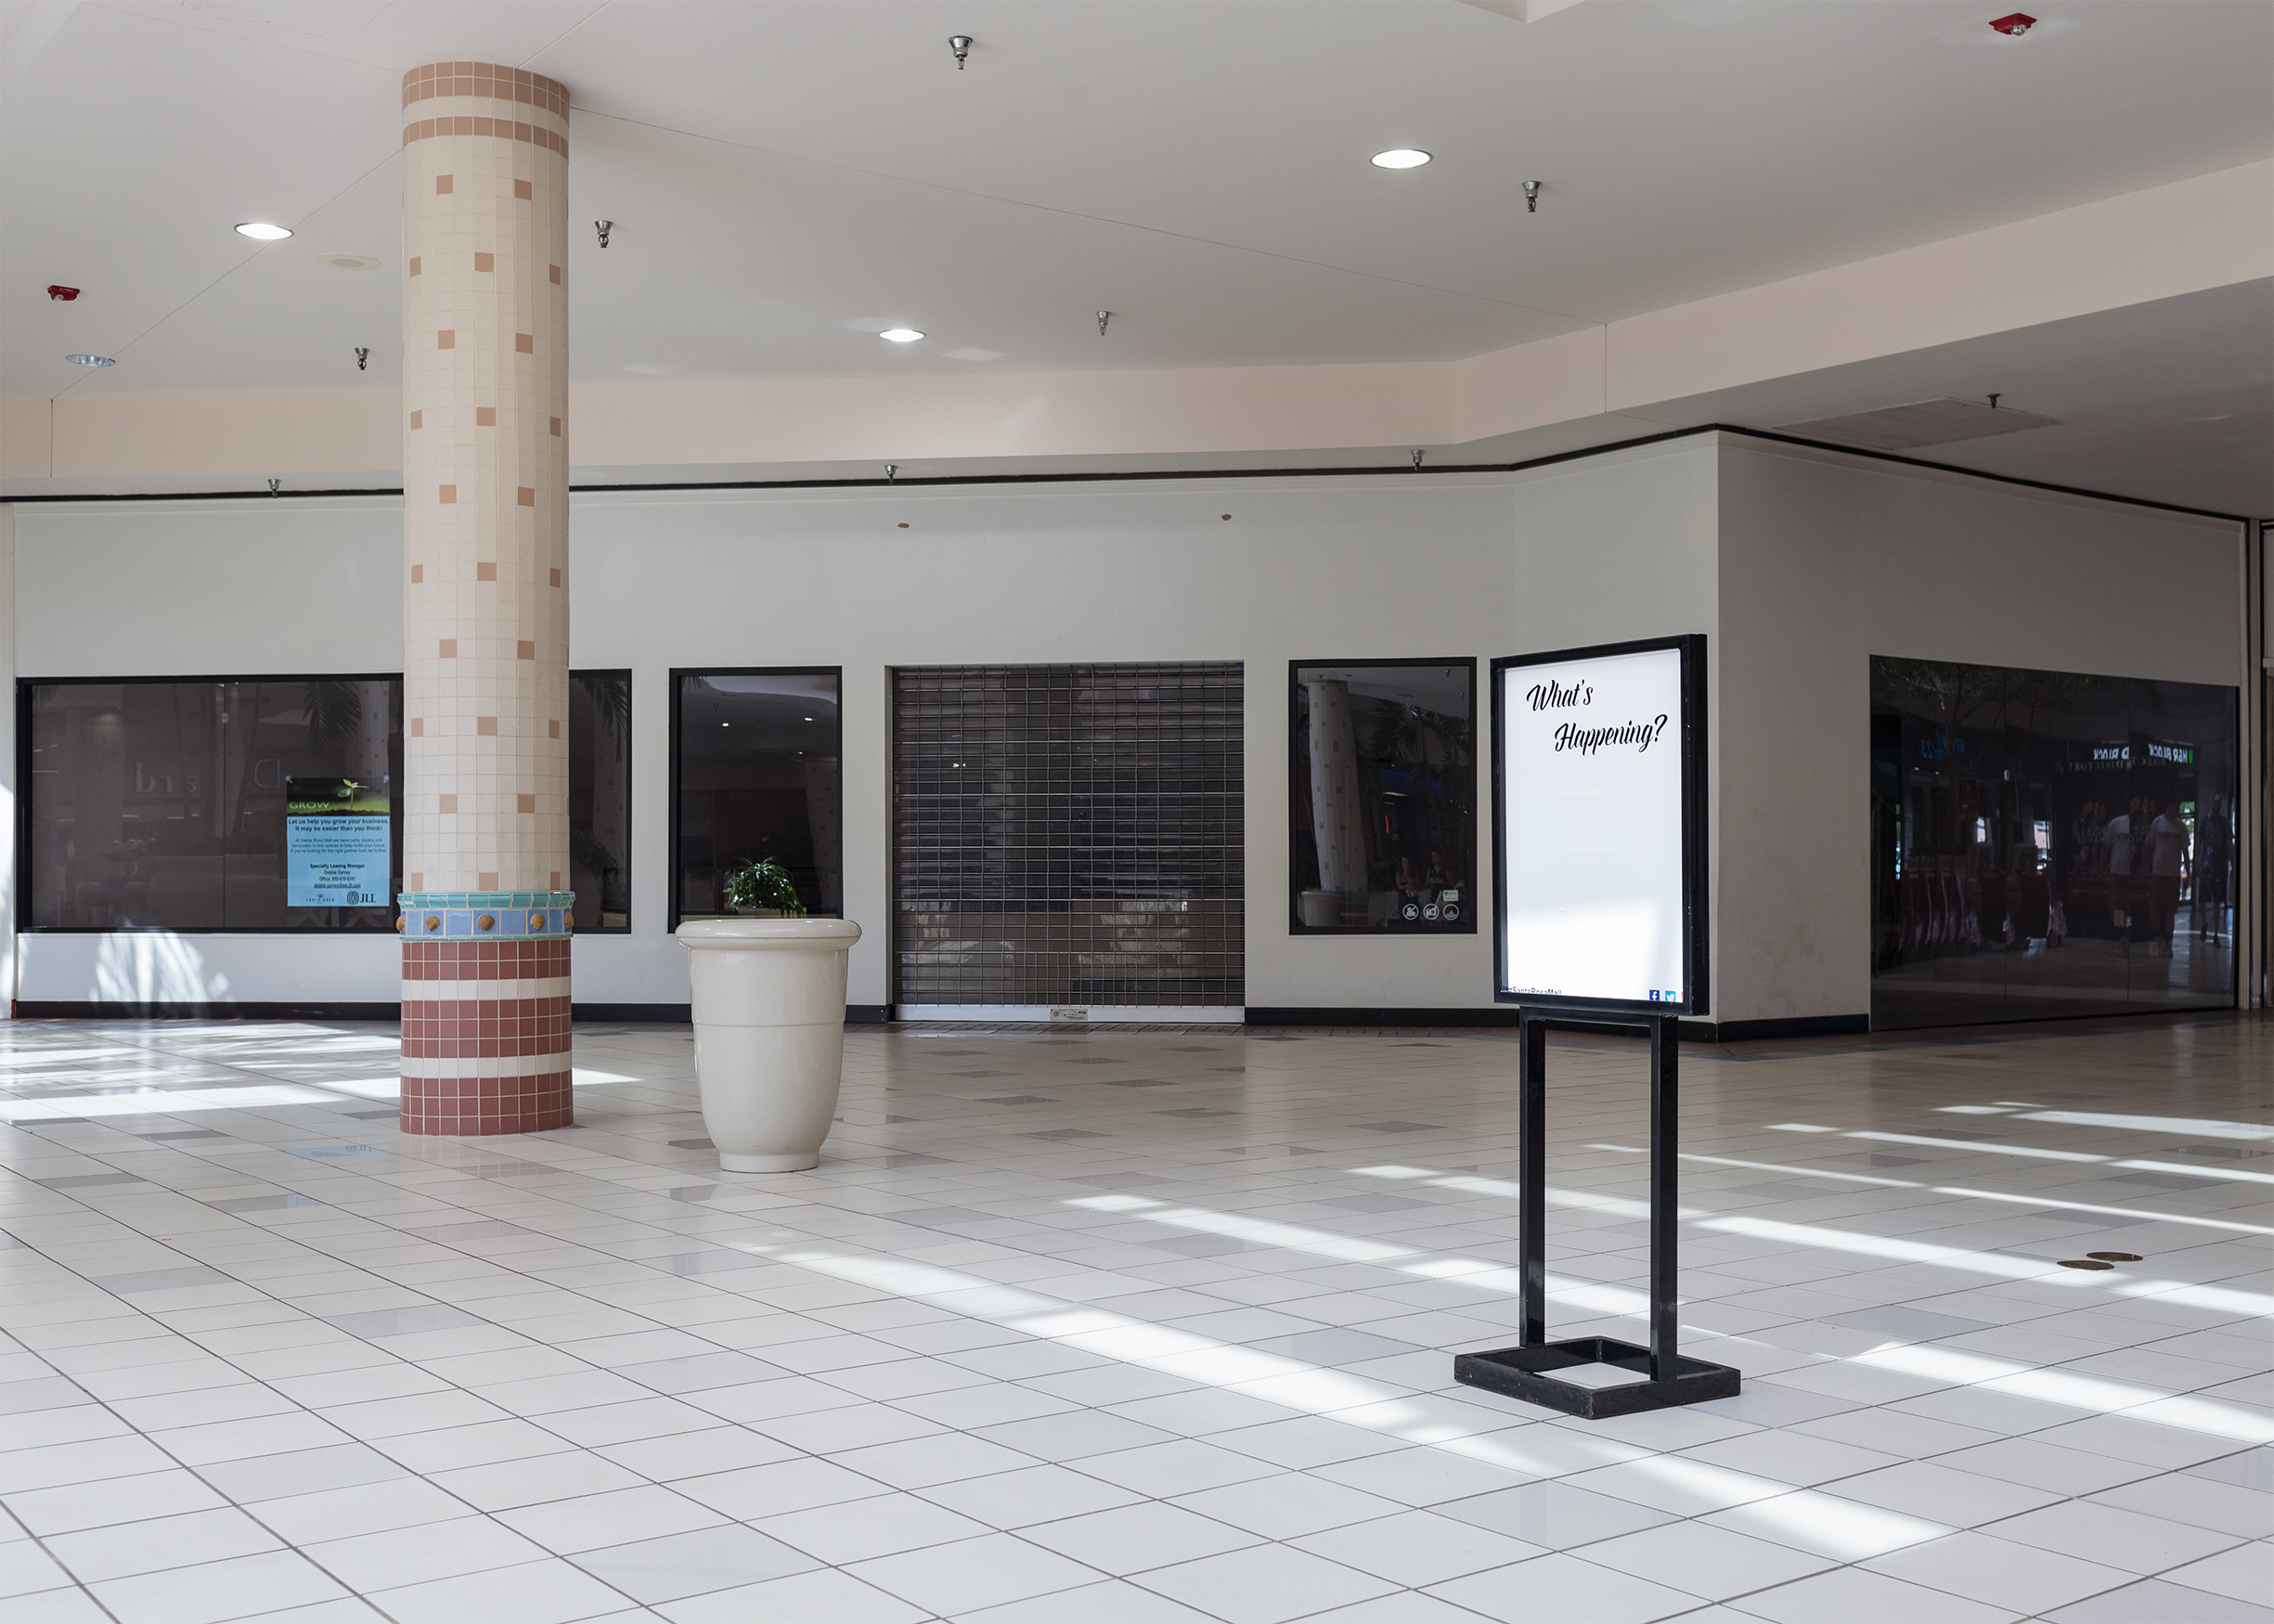 How mall closings in America hurt the towns depending on them